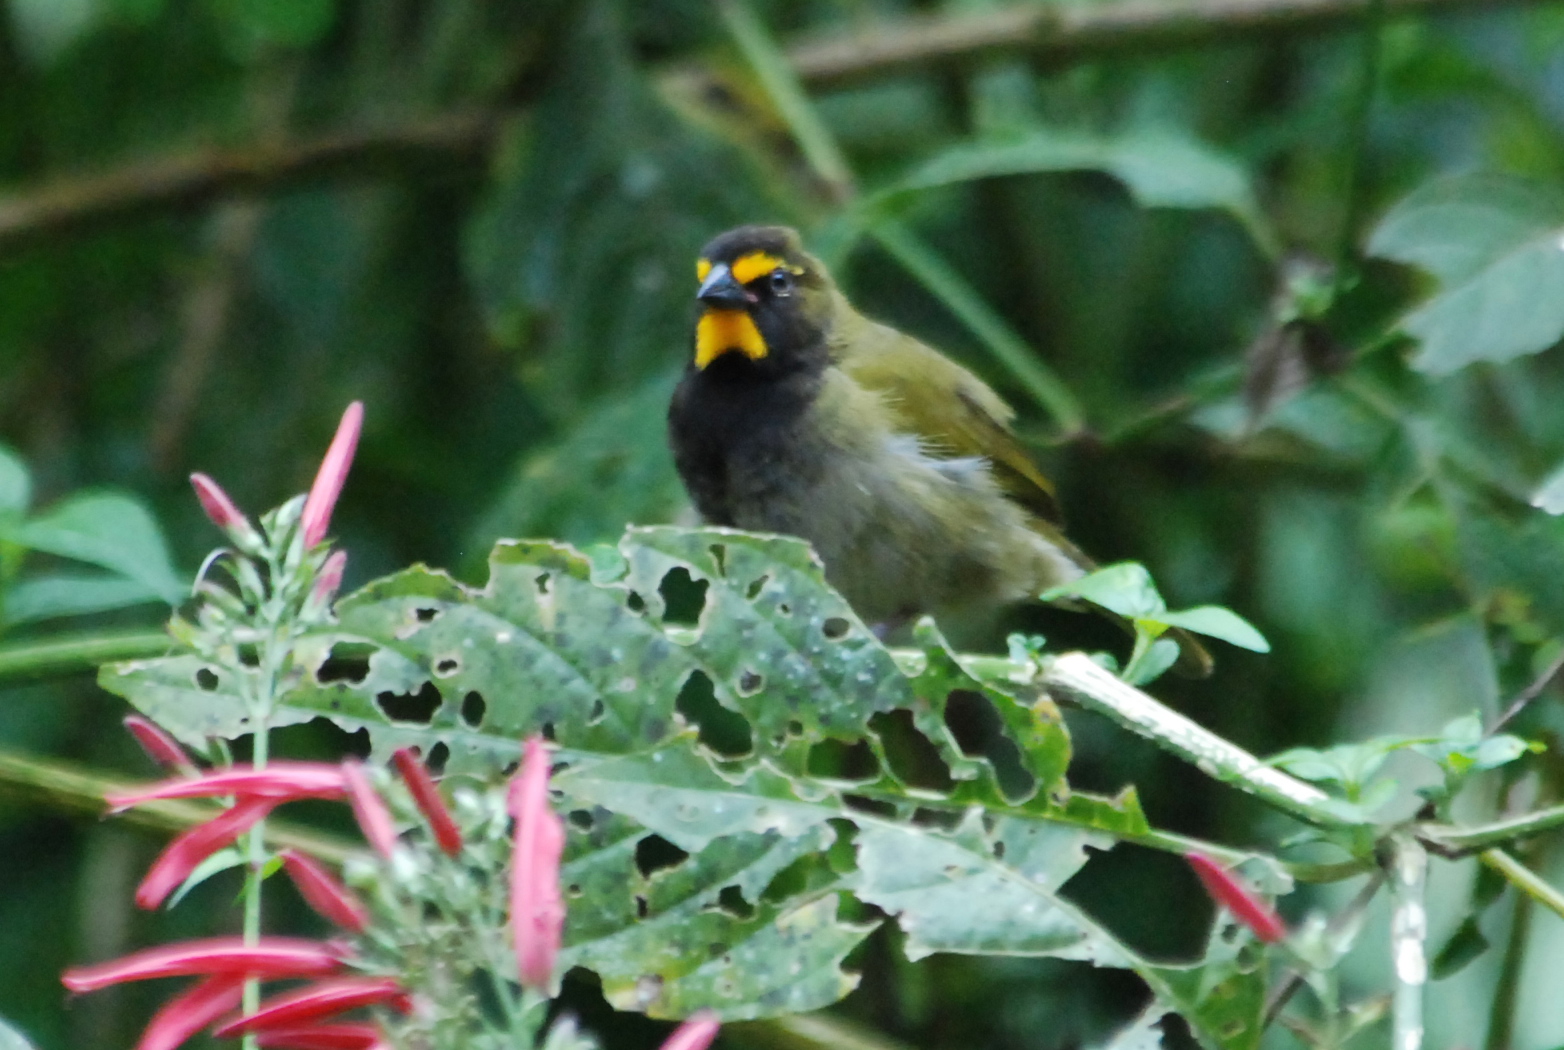 Click picture to see more Yellow-faced Grassquits.